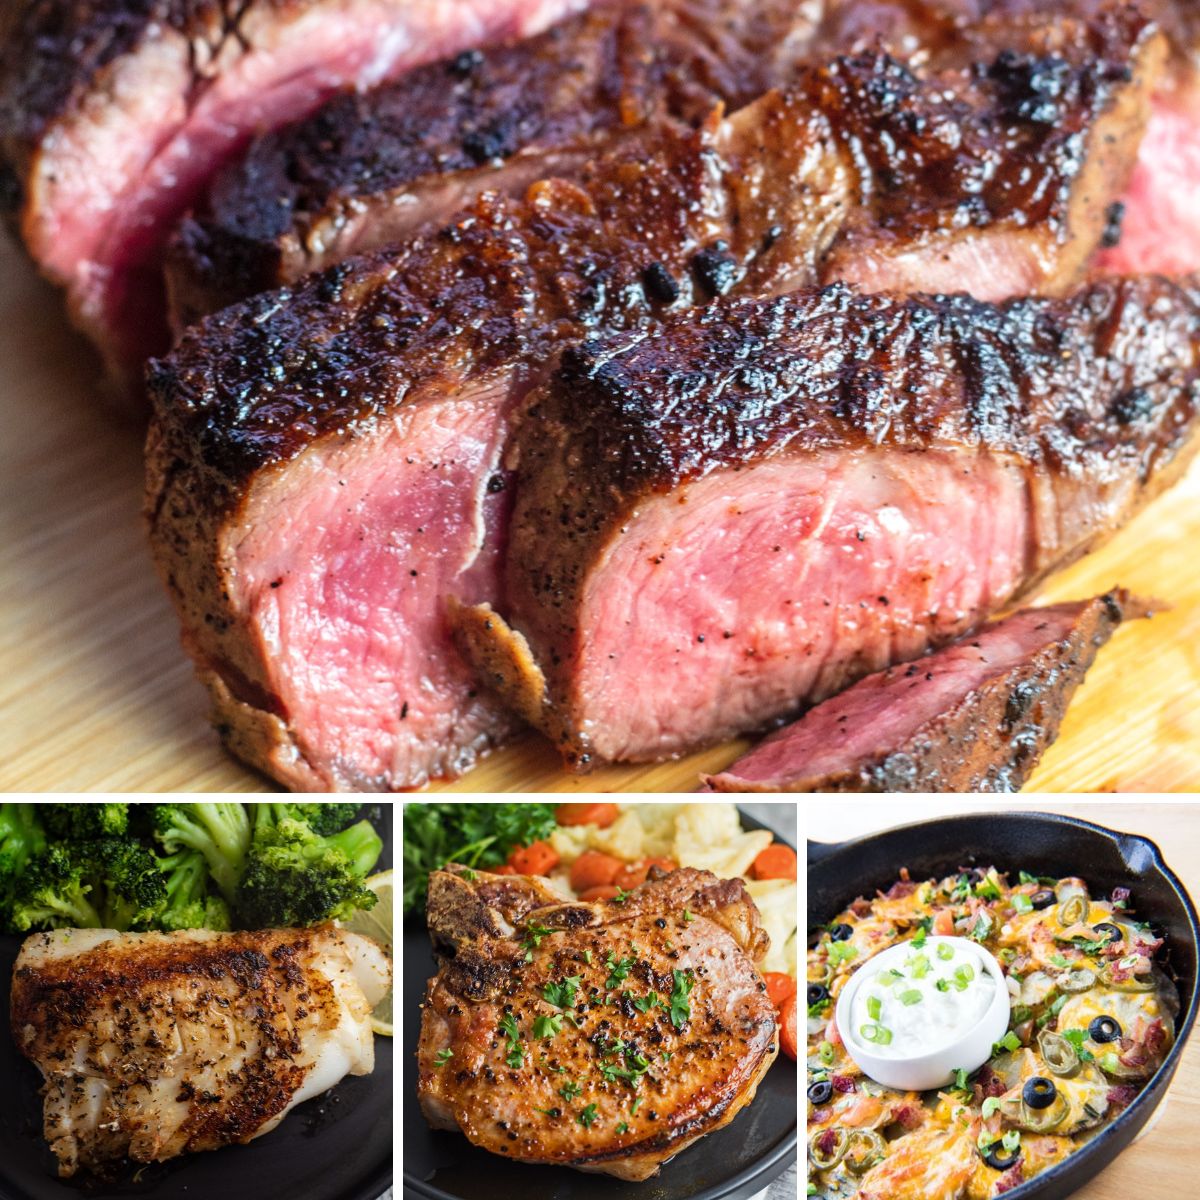 Best cast iron skillet recipes to make fabulous meals with 4 dishes pictured in collage image.